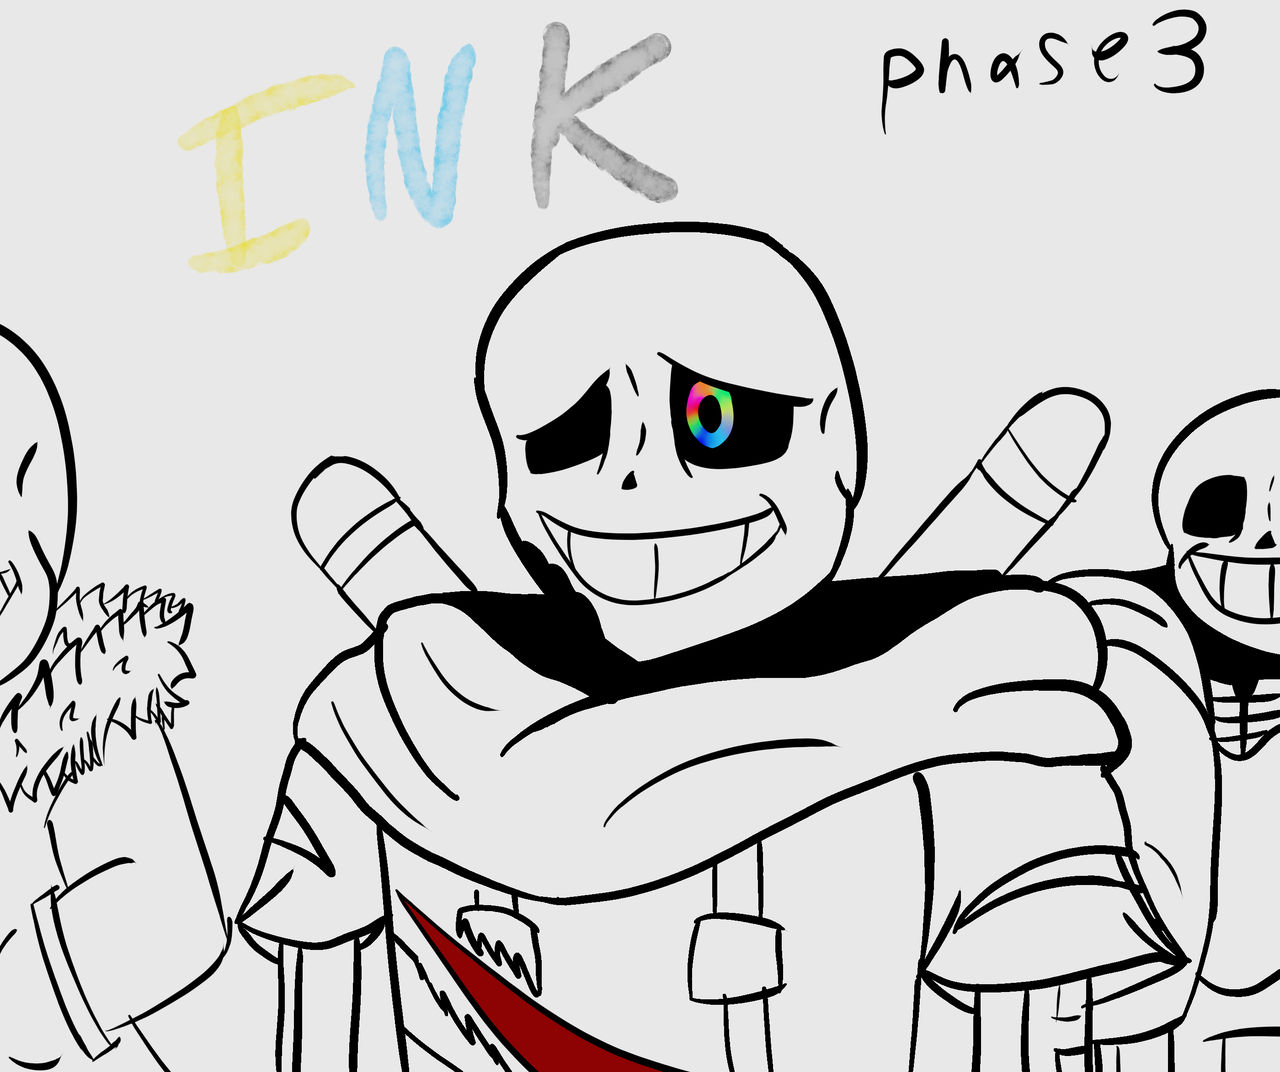 Undertale AU Ink Sans Phase 3 EX Characters in Del by Abbysek on DeviantArt